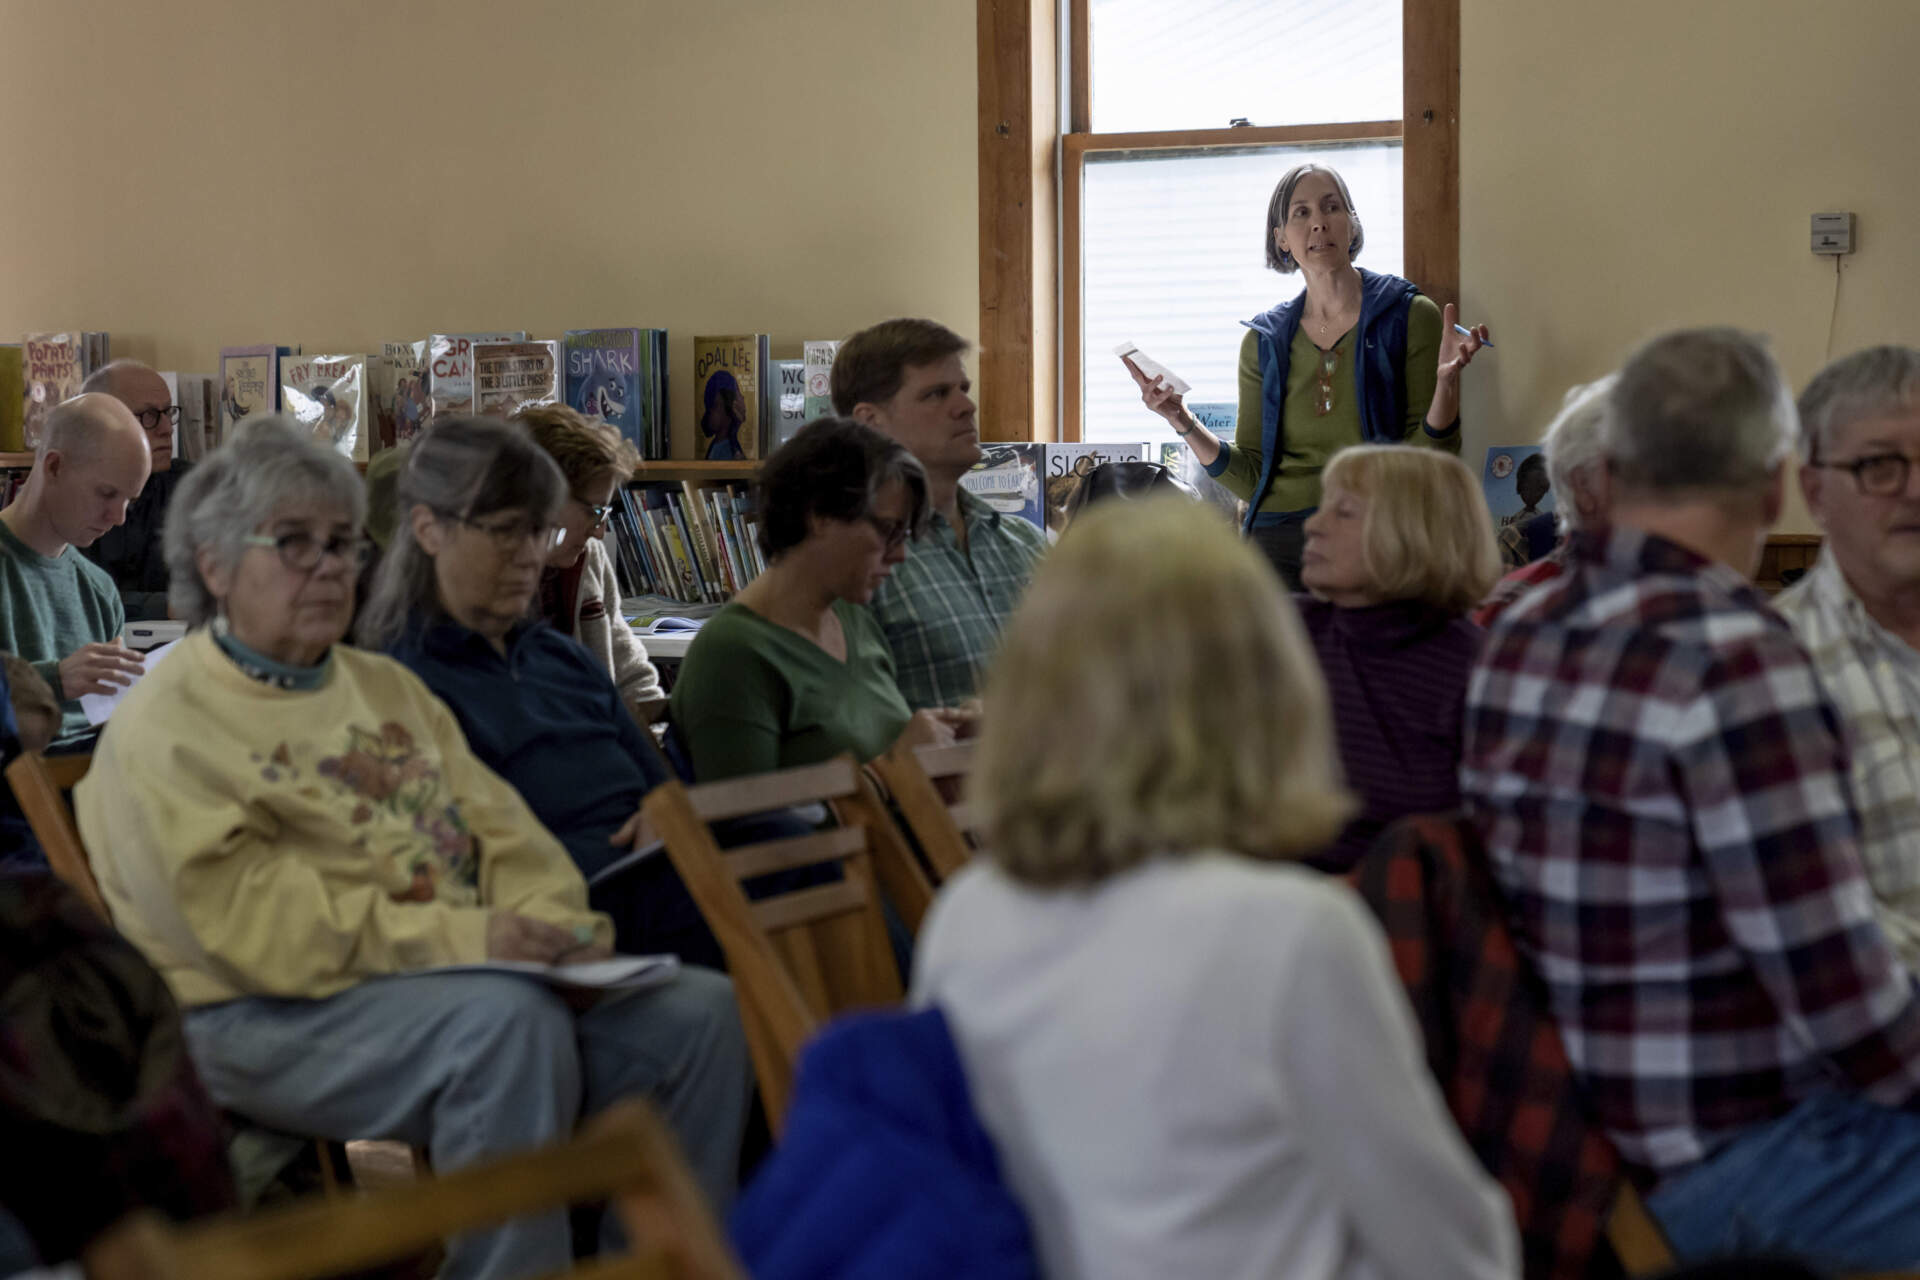 Julie Bomengen speaks during the annual Town Meeting to advocate for an extra $500 in the town's budget for the Lamoille Community Food Share. (David Goldman/AP)